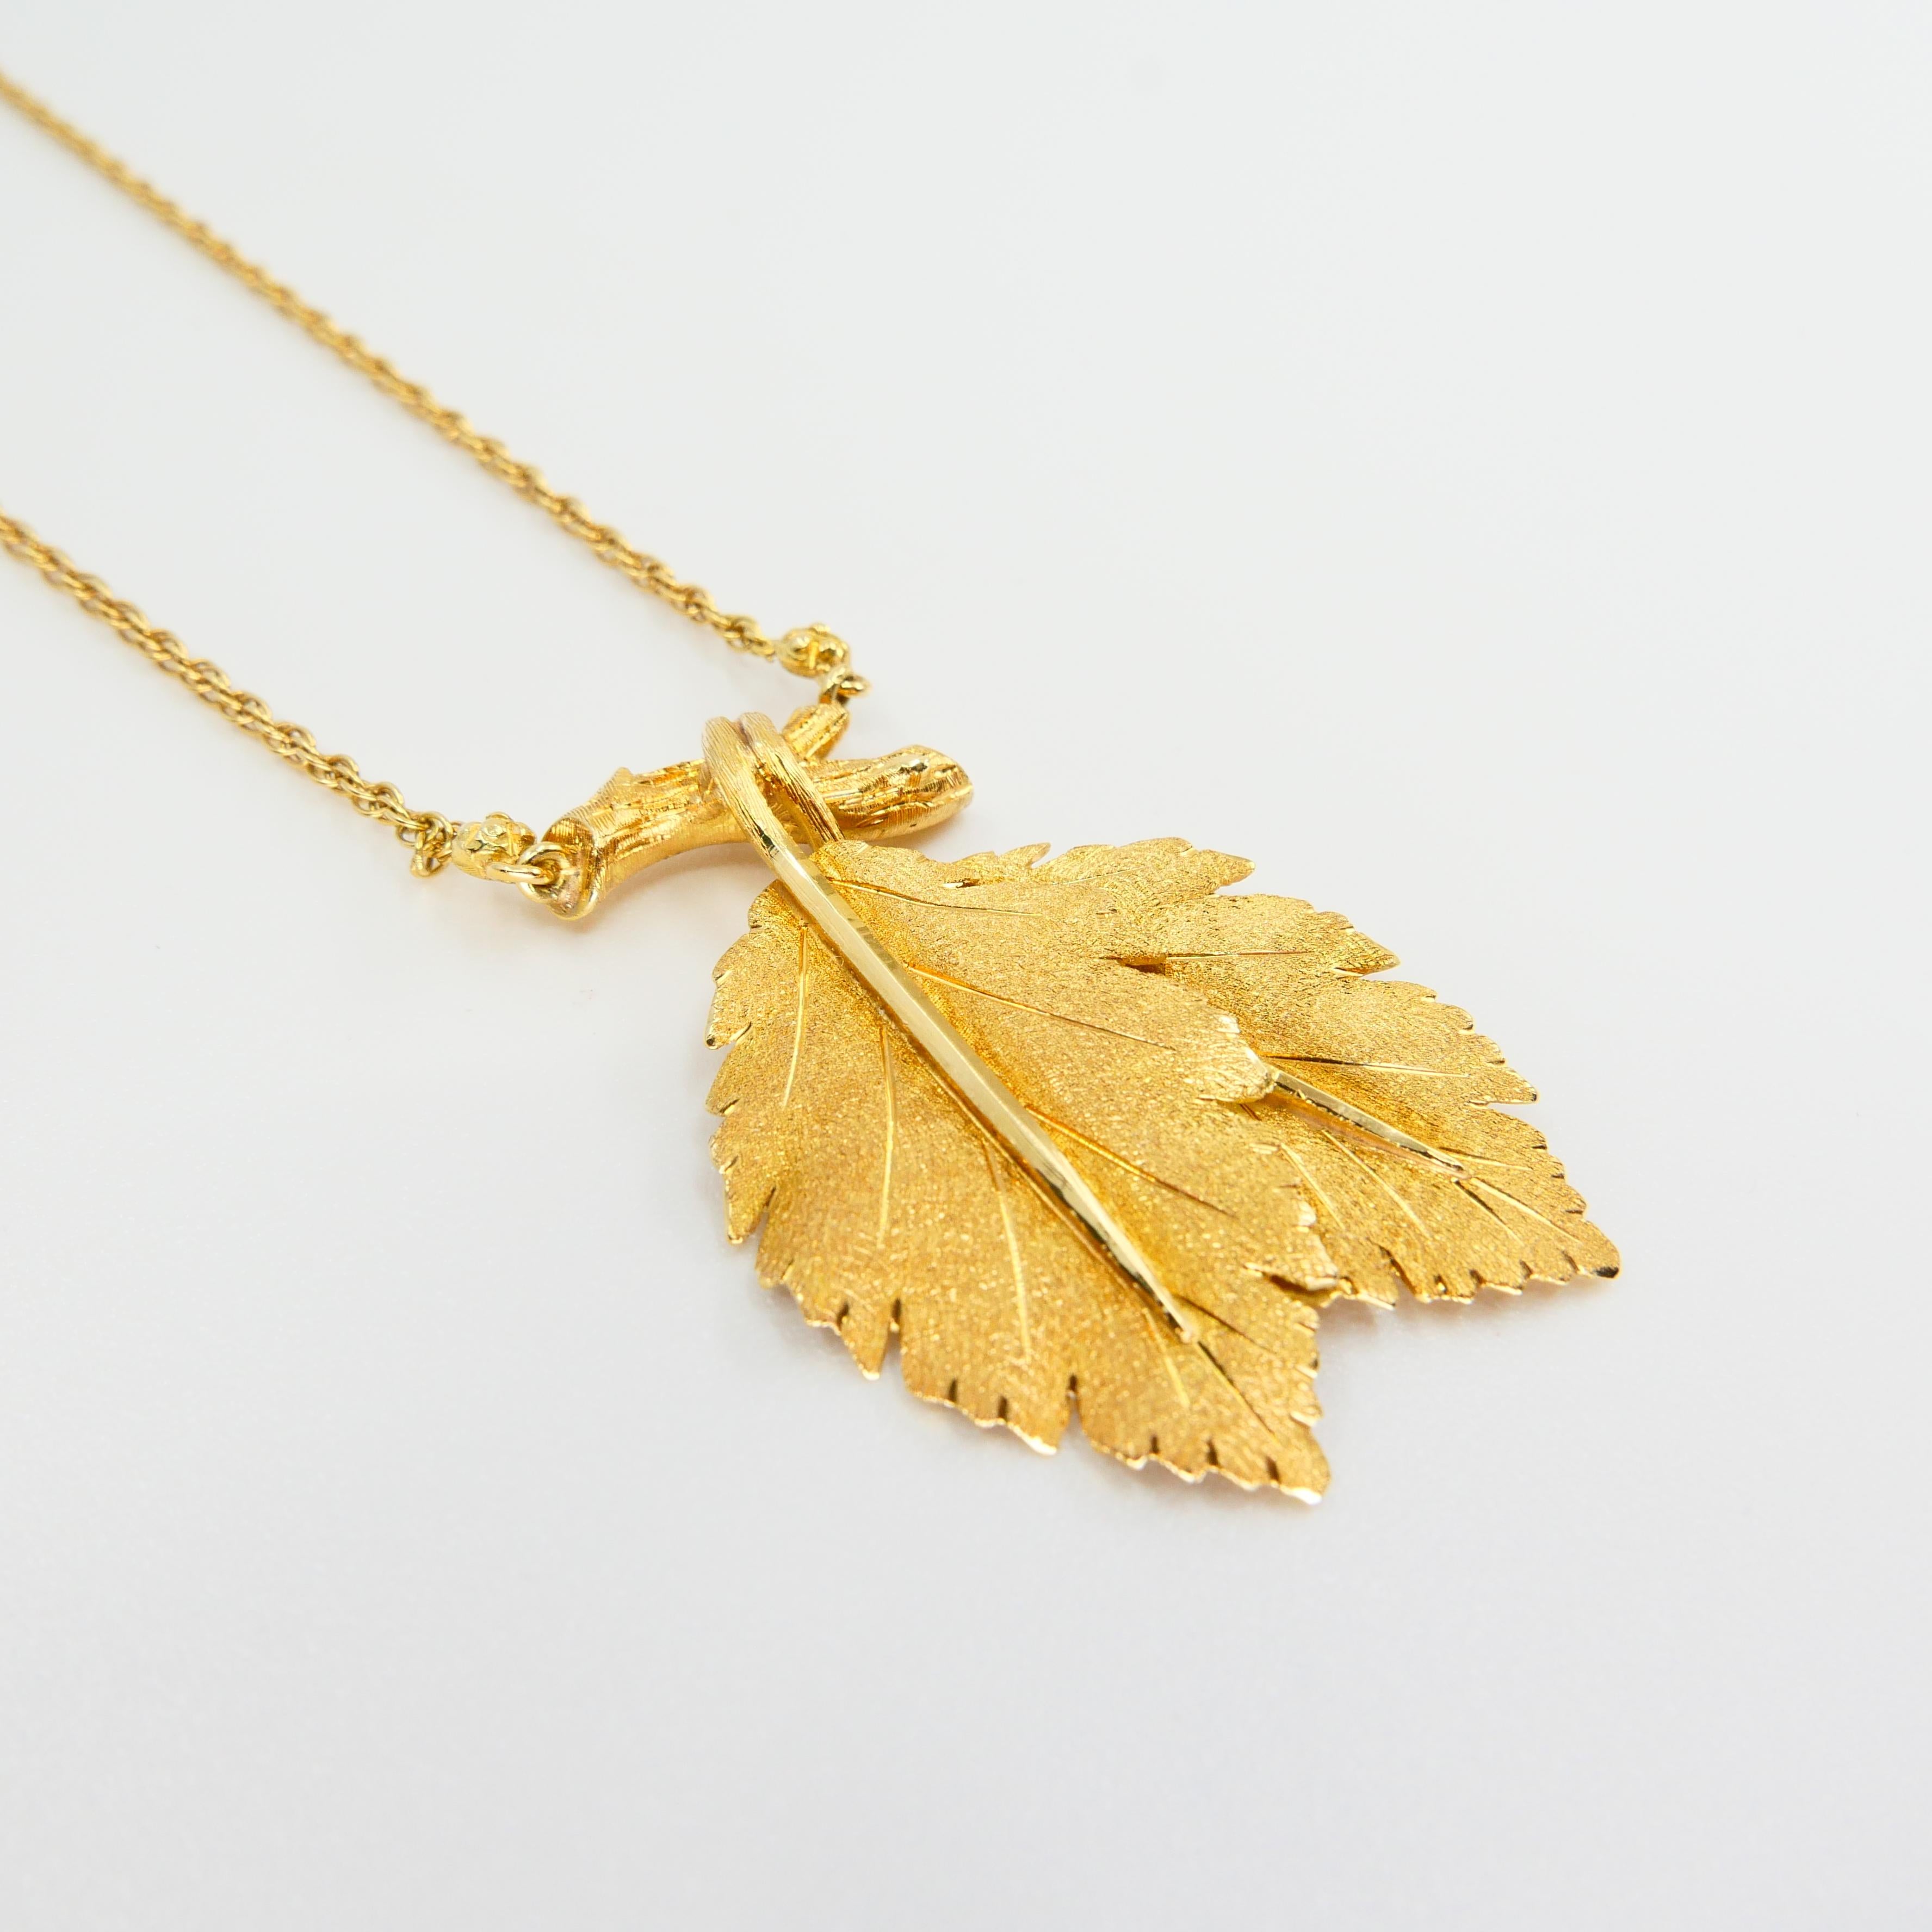 Buccellati, Federico 18K Yellow Gold Leaves and Twigs Pendant Drop Necklace  1